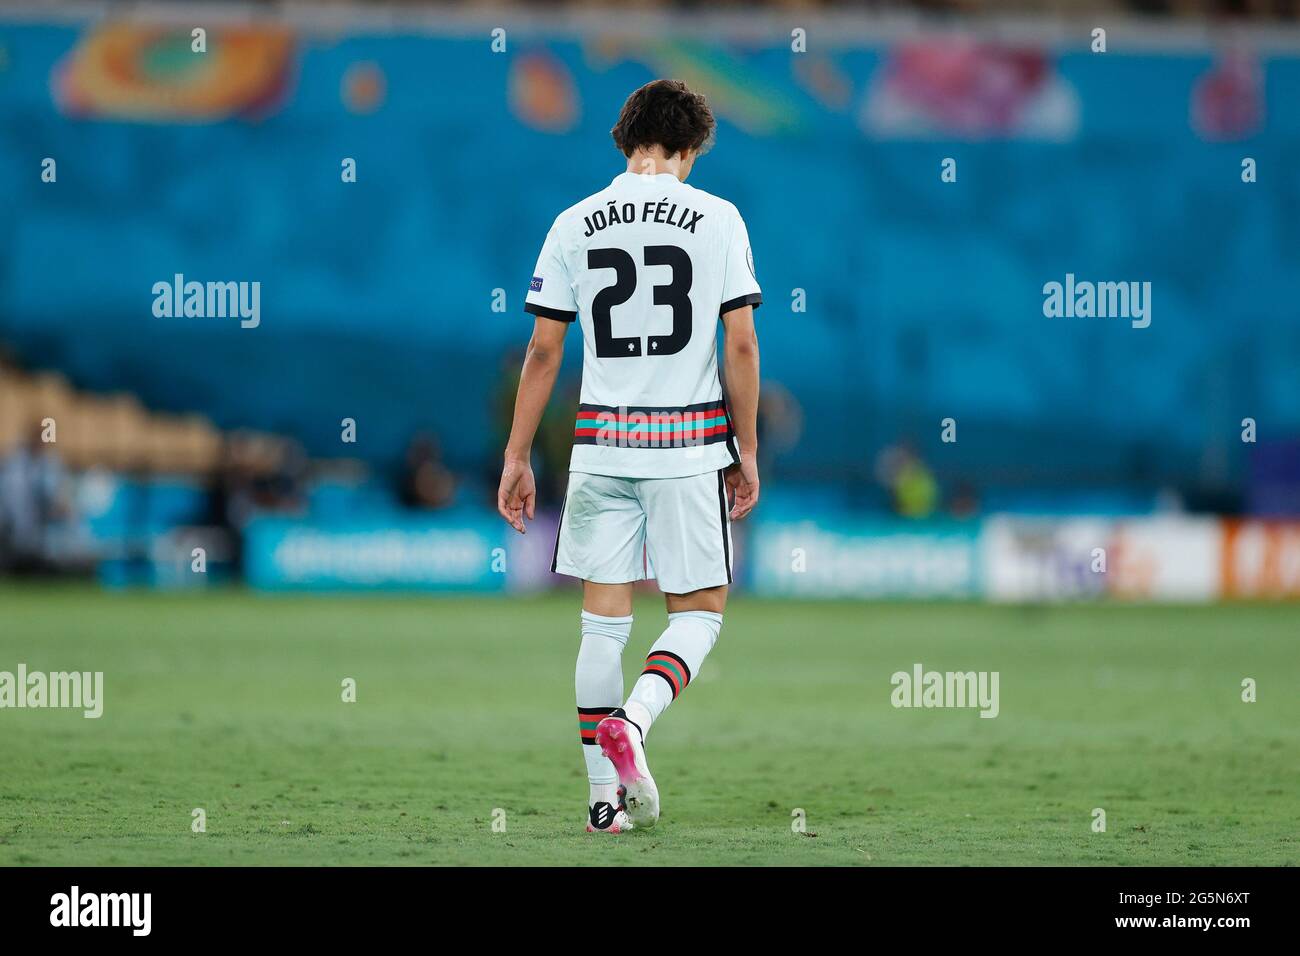 Joao Felix of Portugal during the UEFA EURO 2020, Round of 16